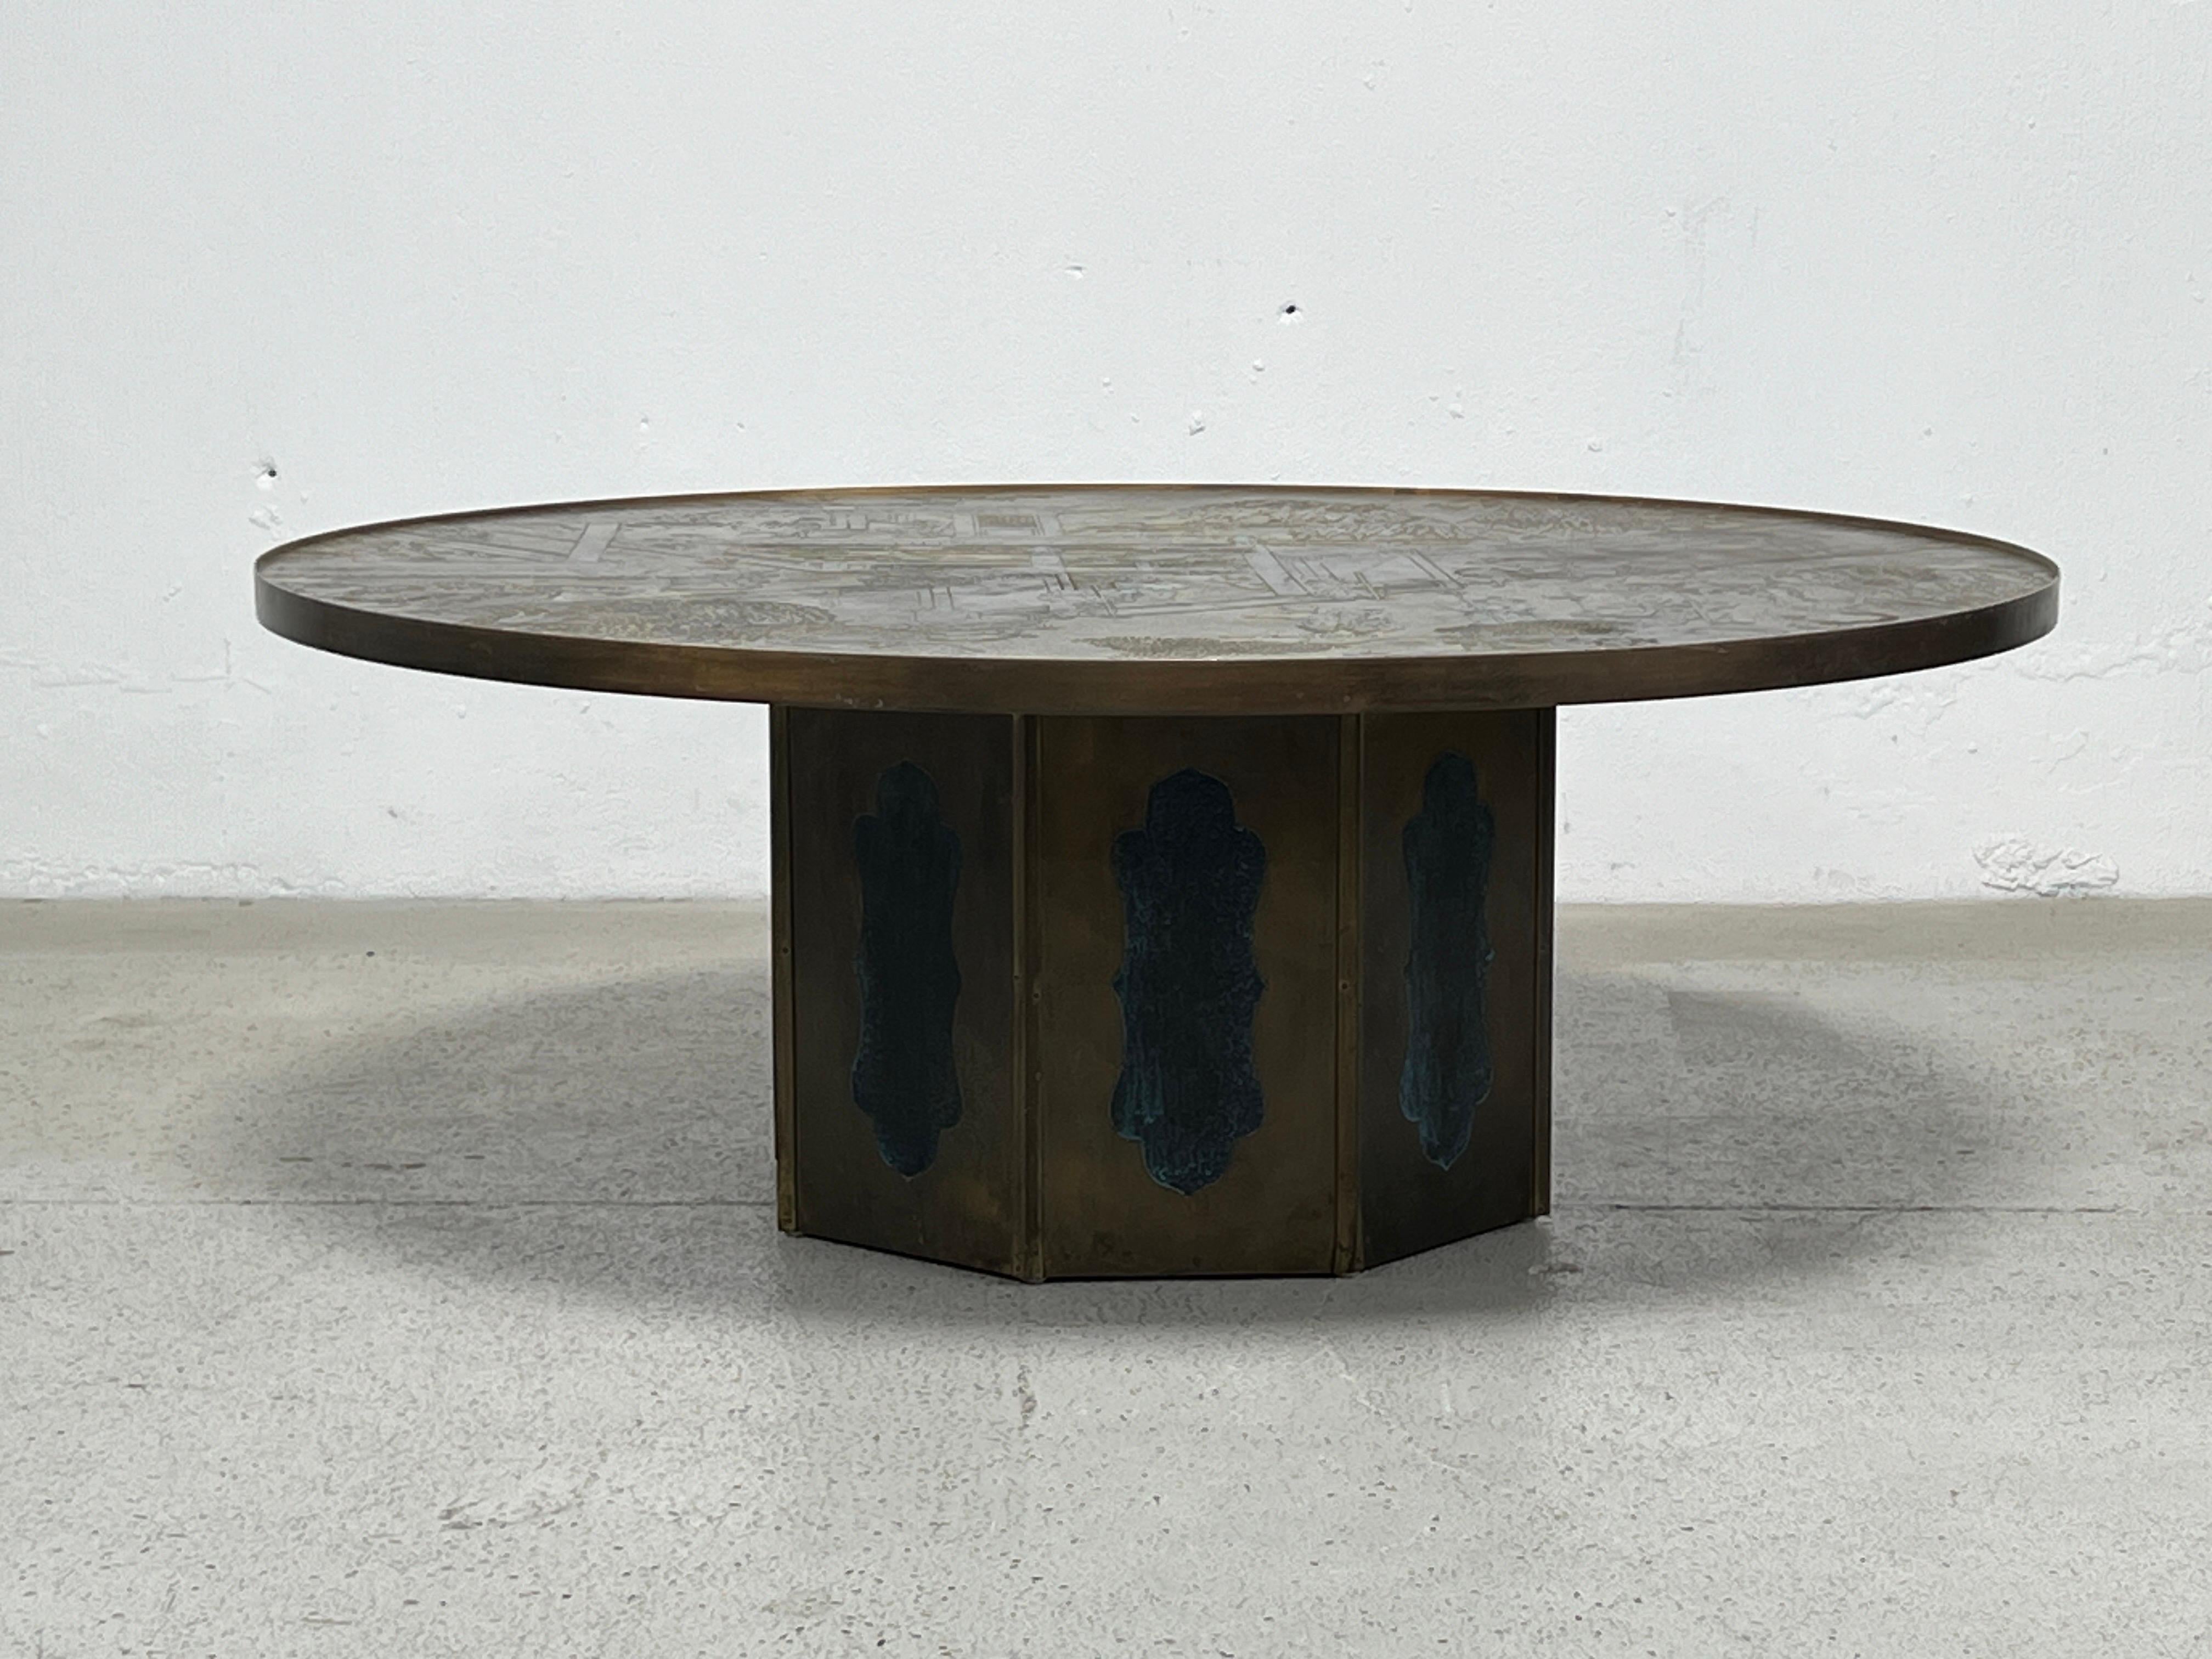 A large and impressive bronze and pewter Chan coffee table designed by Philip and Kelvin Laverne.